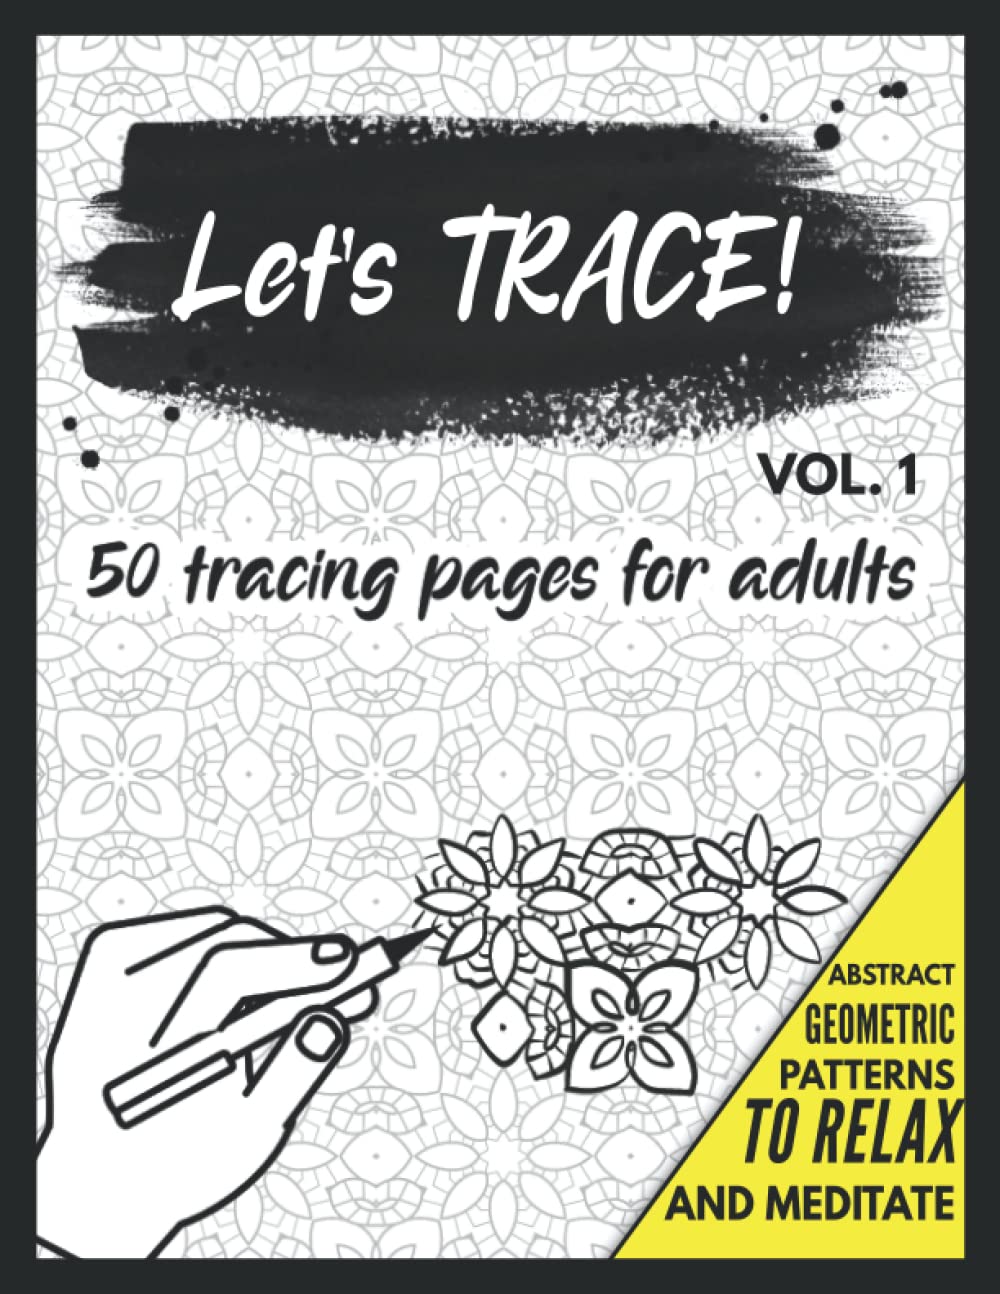 let's trace